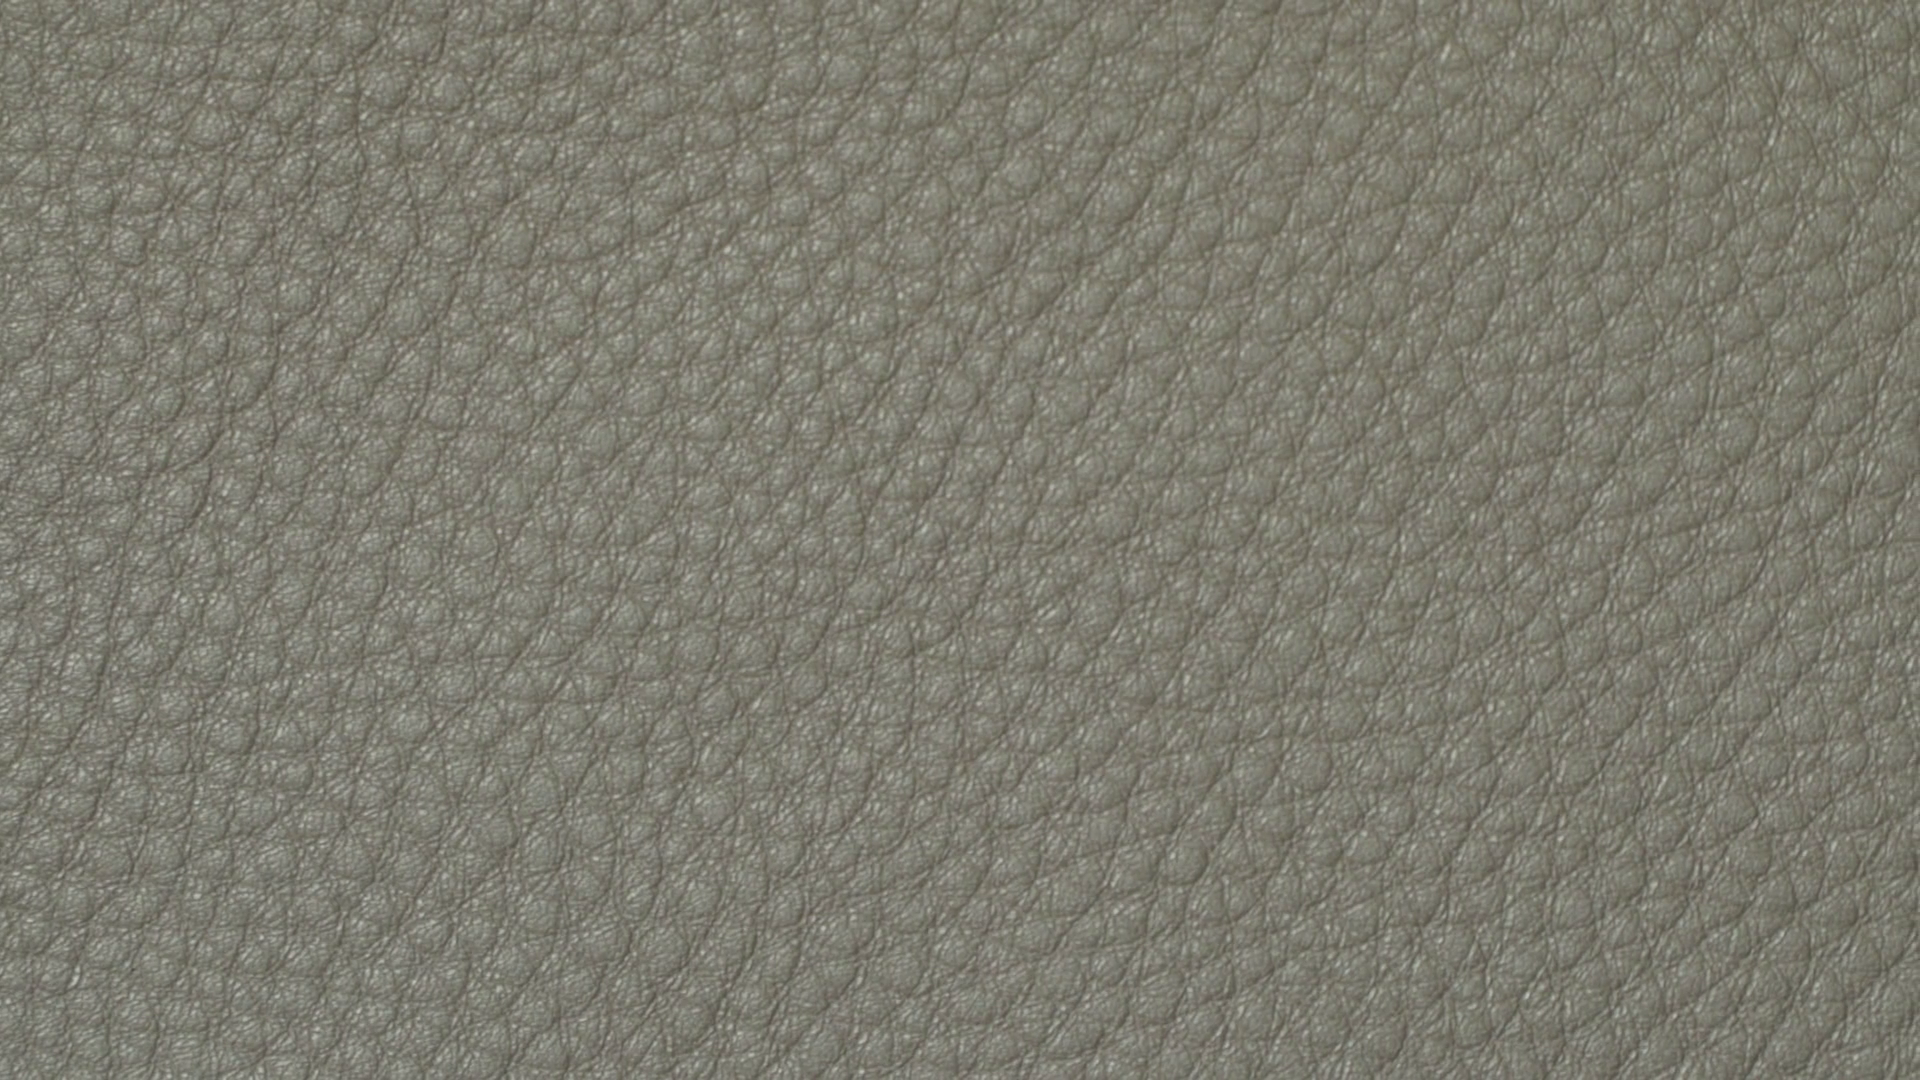 Leather texture surface. Concept of natural grain cow leather ...